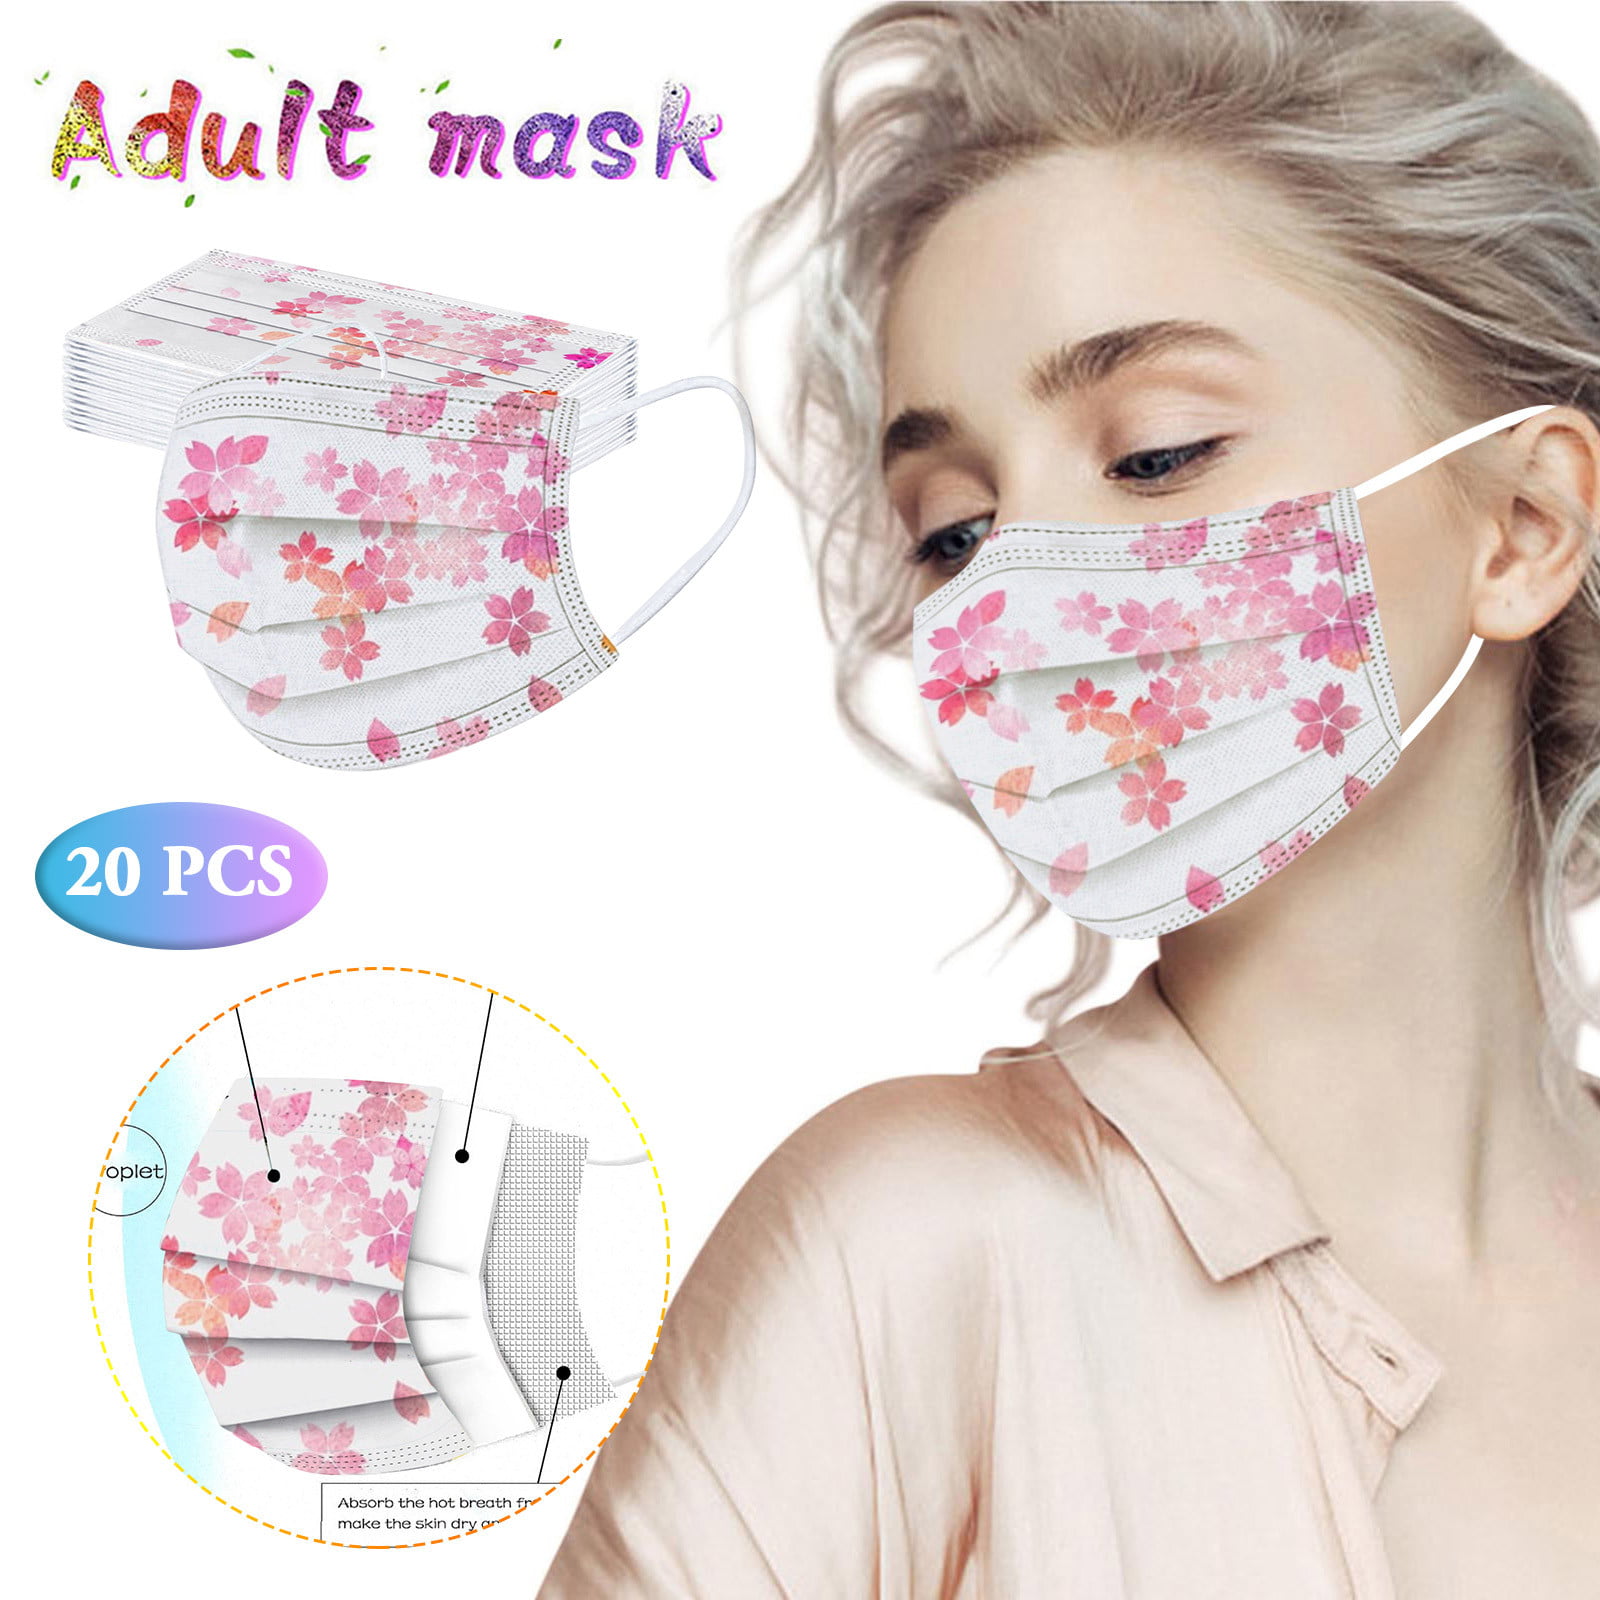 4 Plyer Non-Woven Multicolor Face Bandanas for Women Men 20PCs Disposable Floral Print Adults Face Macks with Adjustable Ear Loops for Friends 